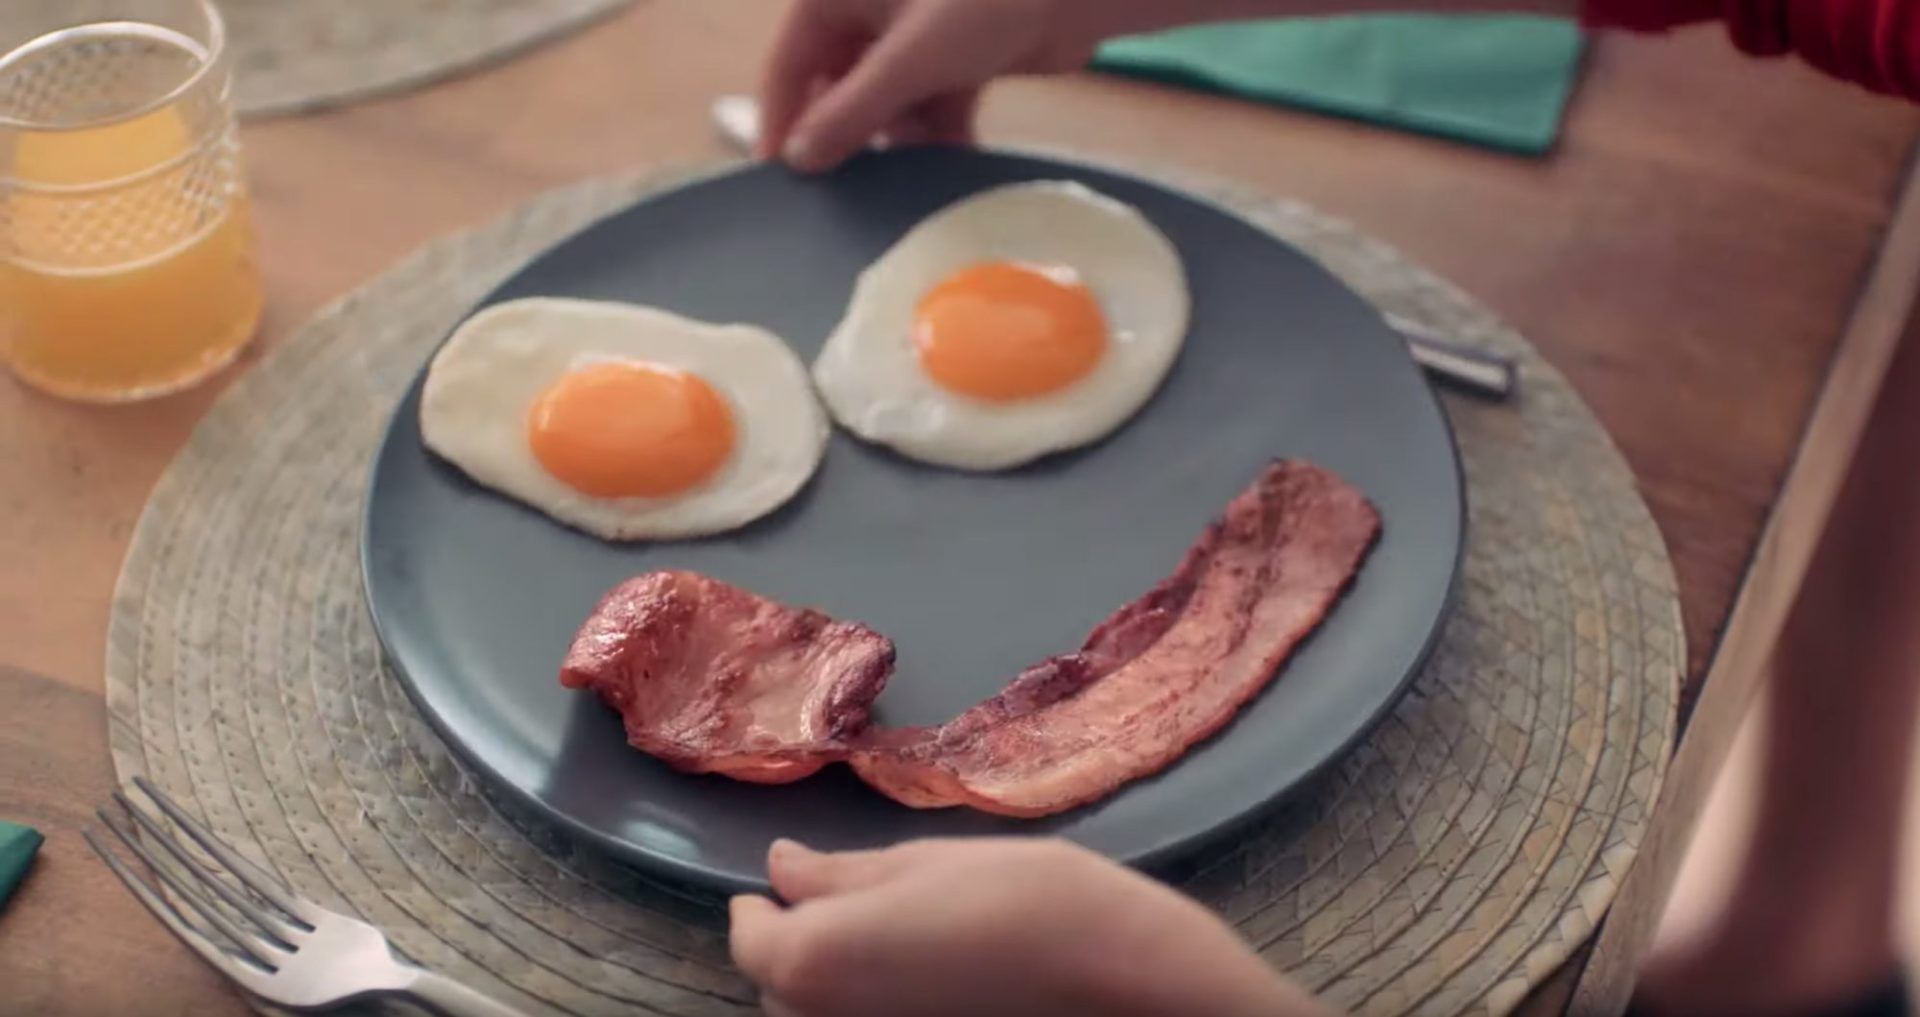 Two eggs and a piece of bacon laid out on a plate to look like a smiling face